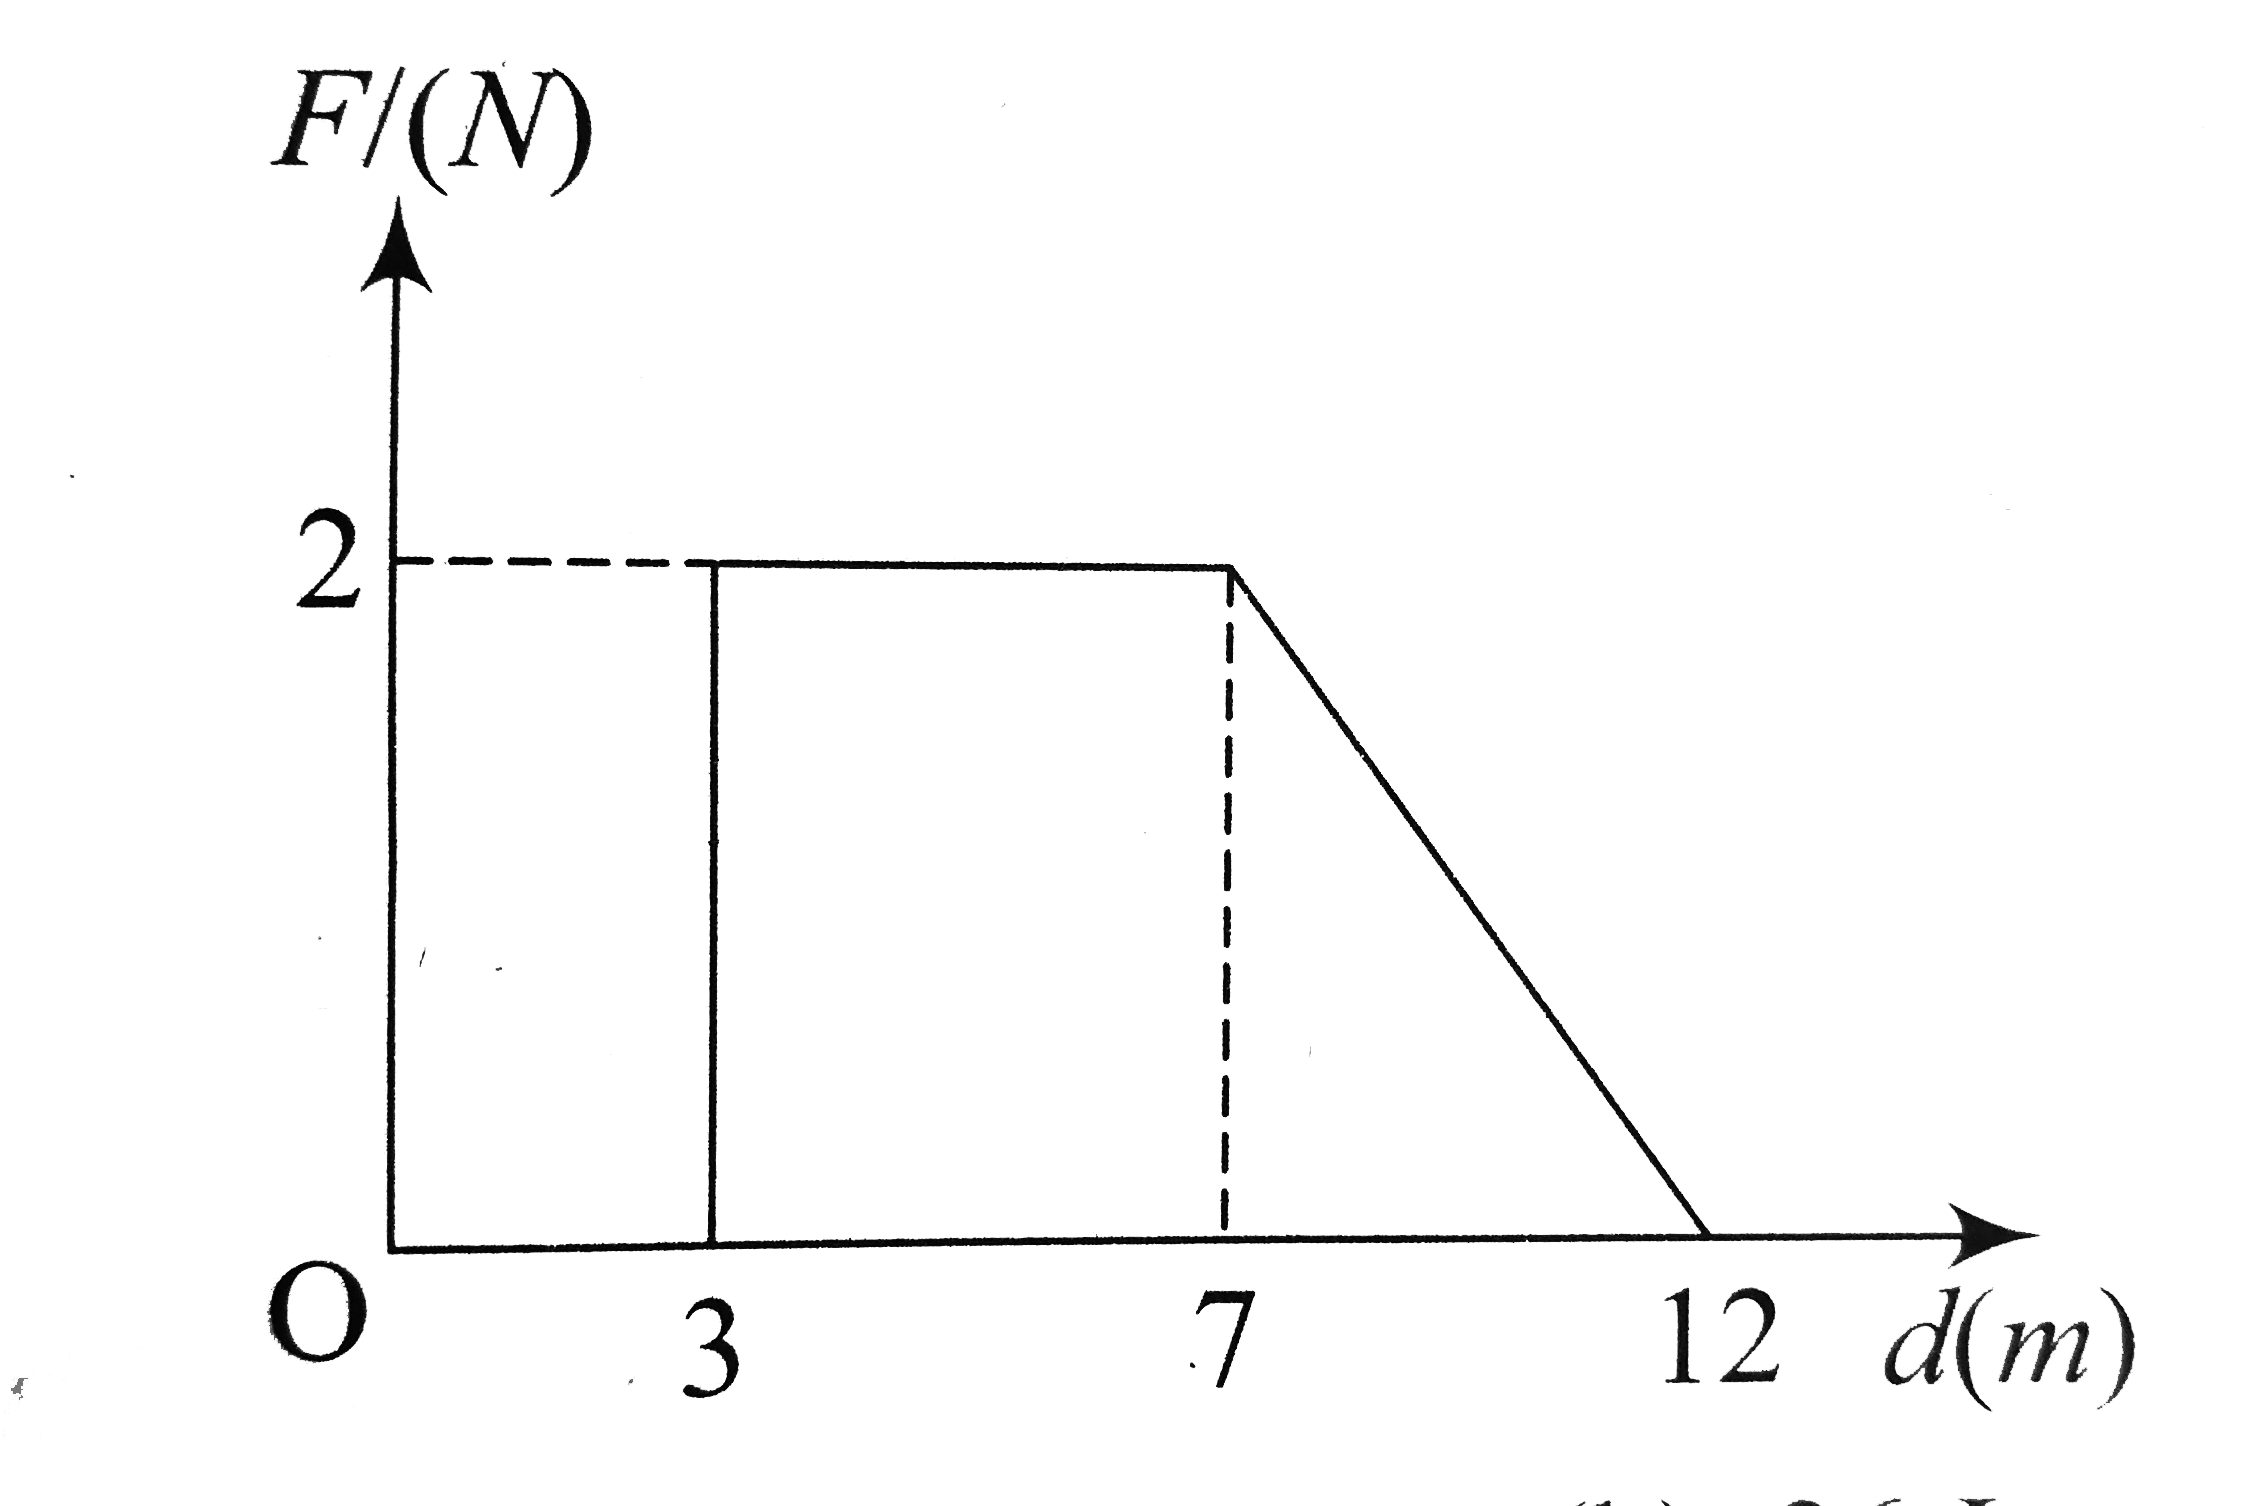 Force F on a particle moving in a straight line varies with distance d as shown in the figure. The work done on the particle during its displacement of 12 m is